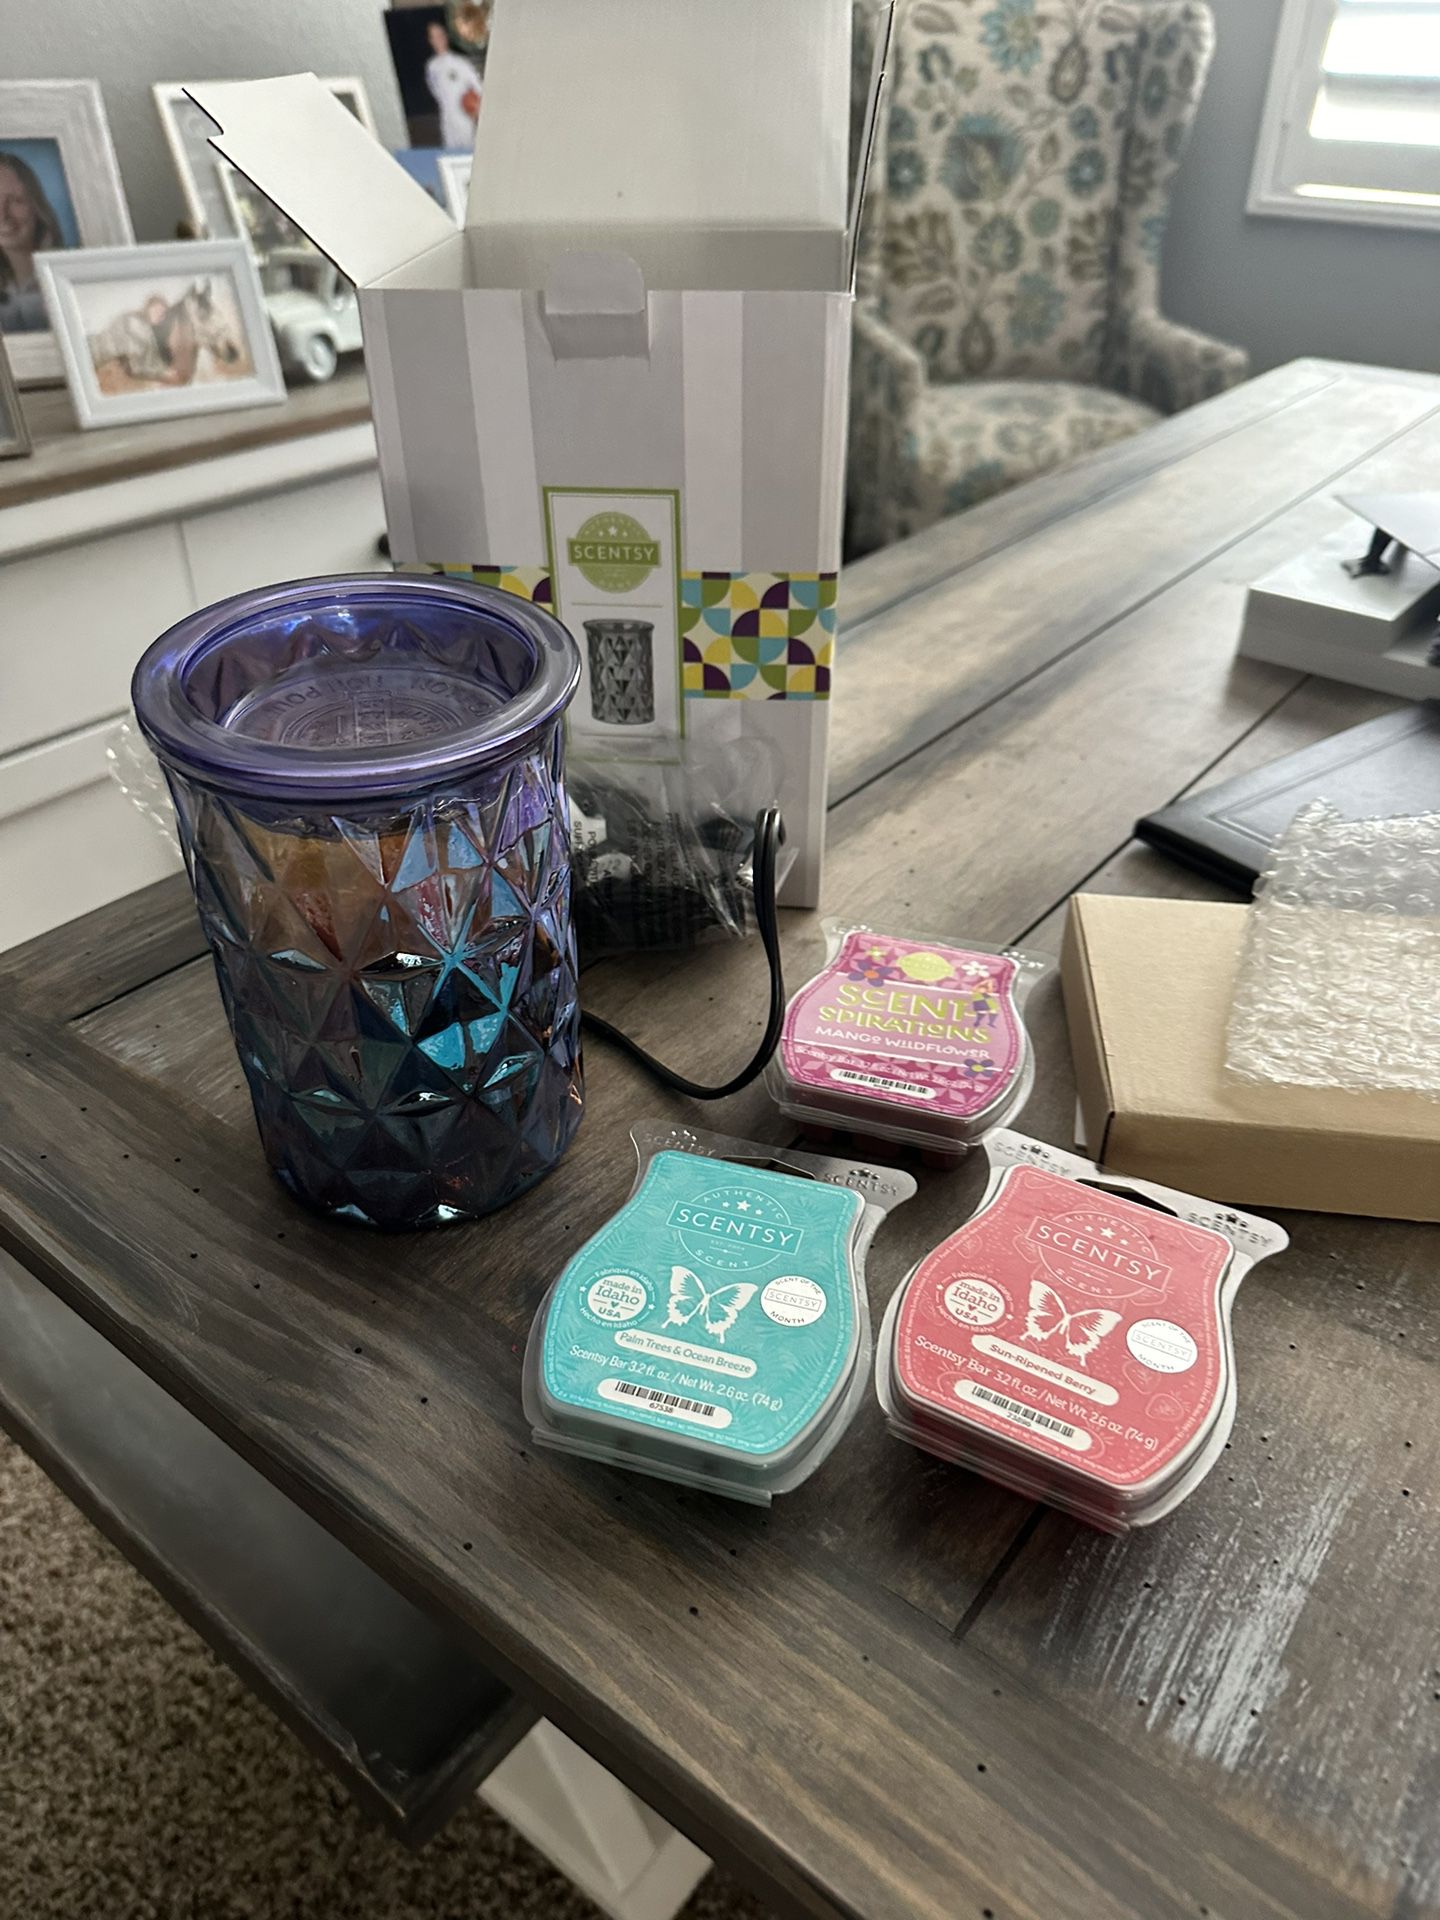 New Scentsy Full Size Warmer And 3 Scent Packs 